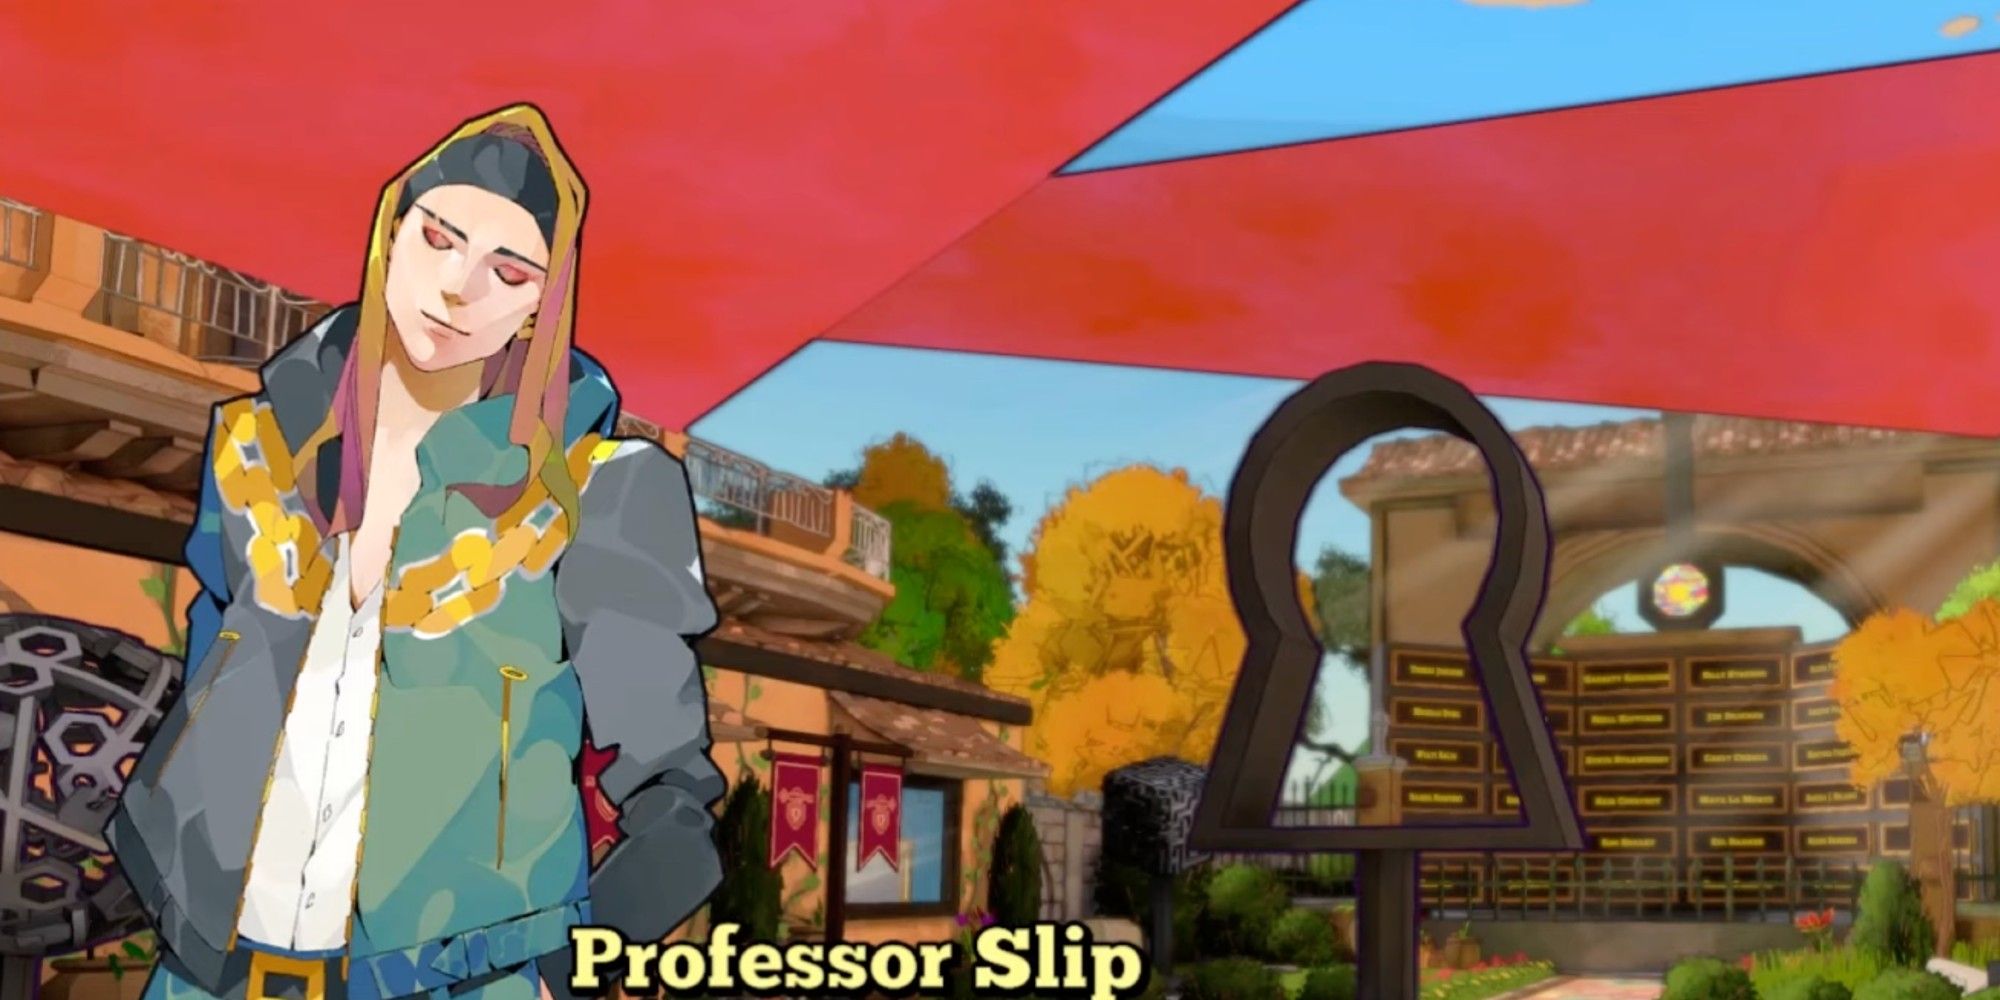 Prof Slip proves his name by slipping away from the scene